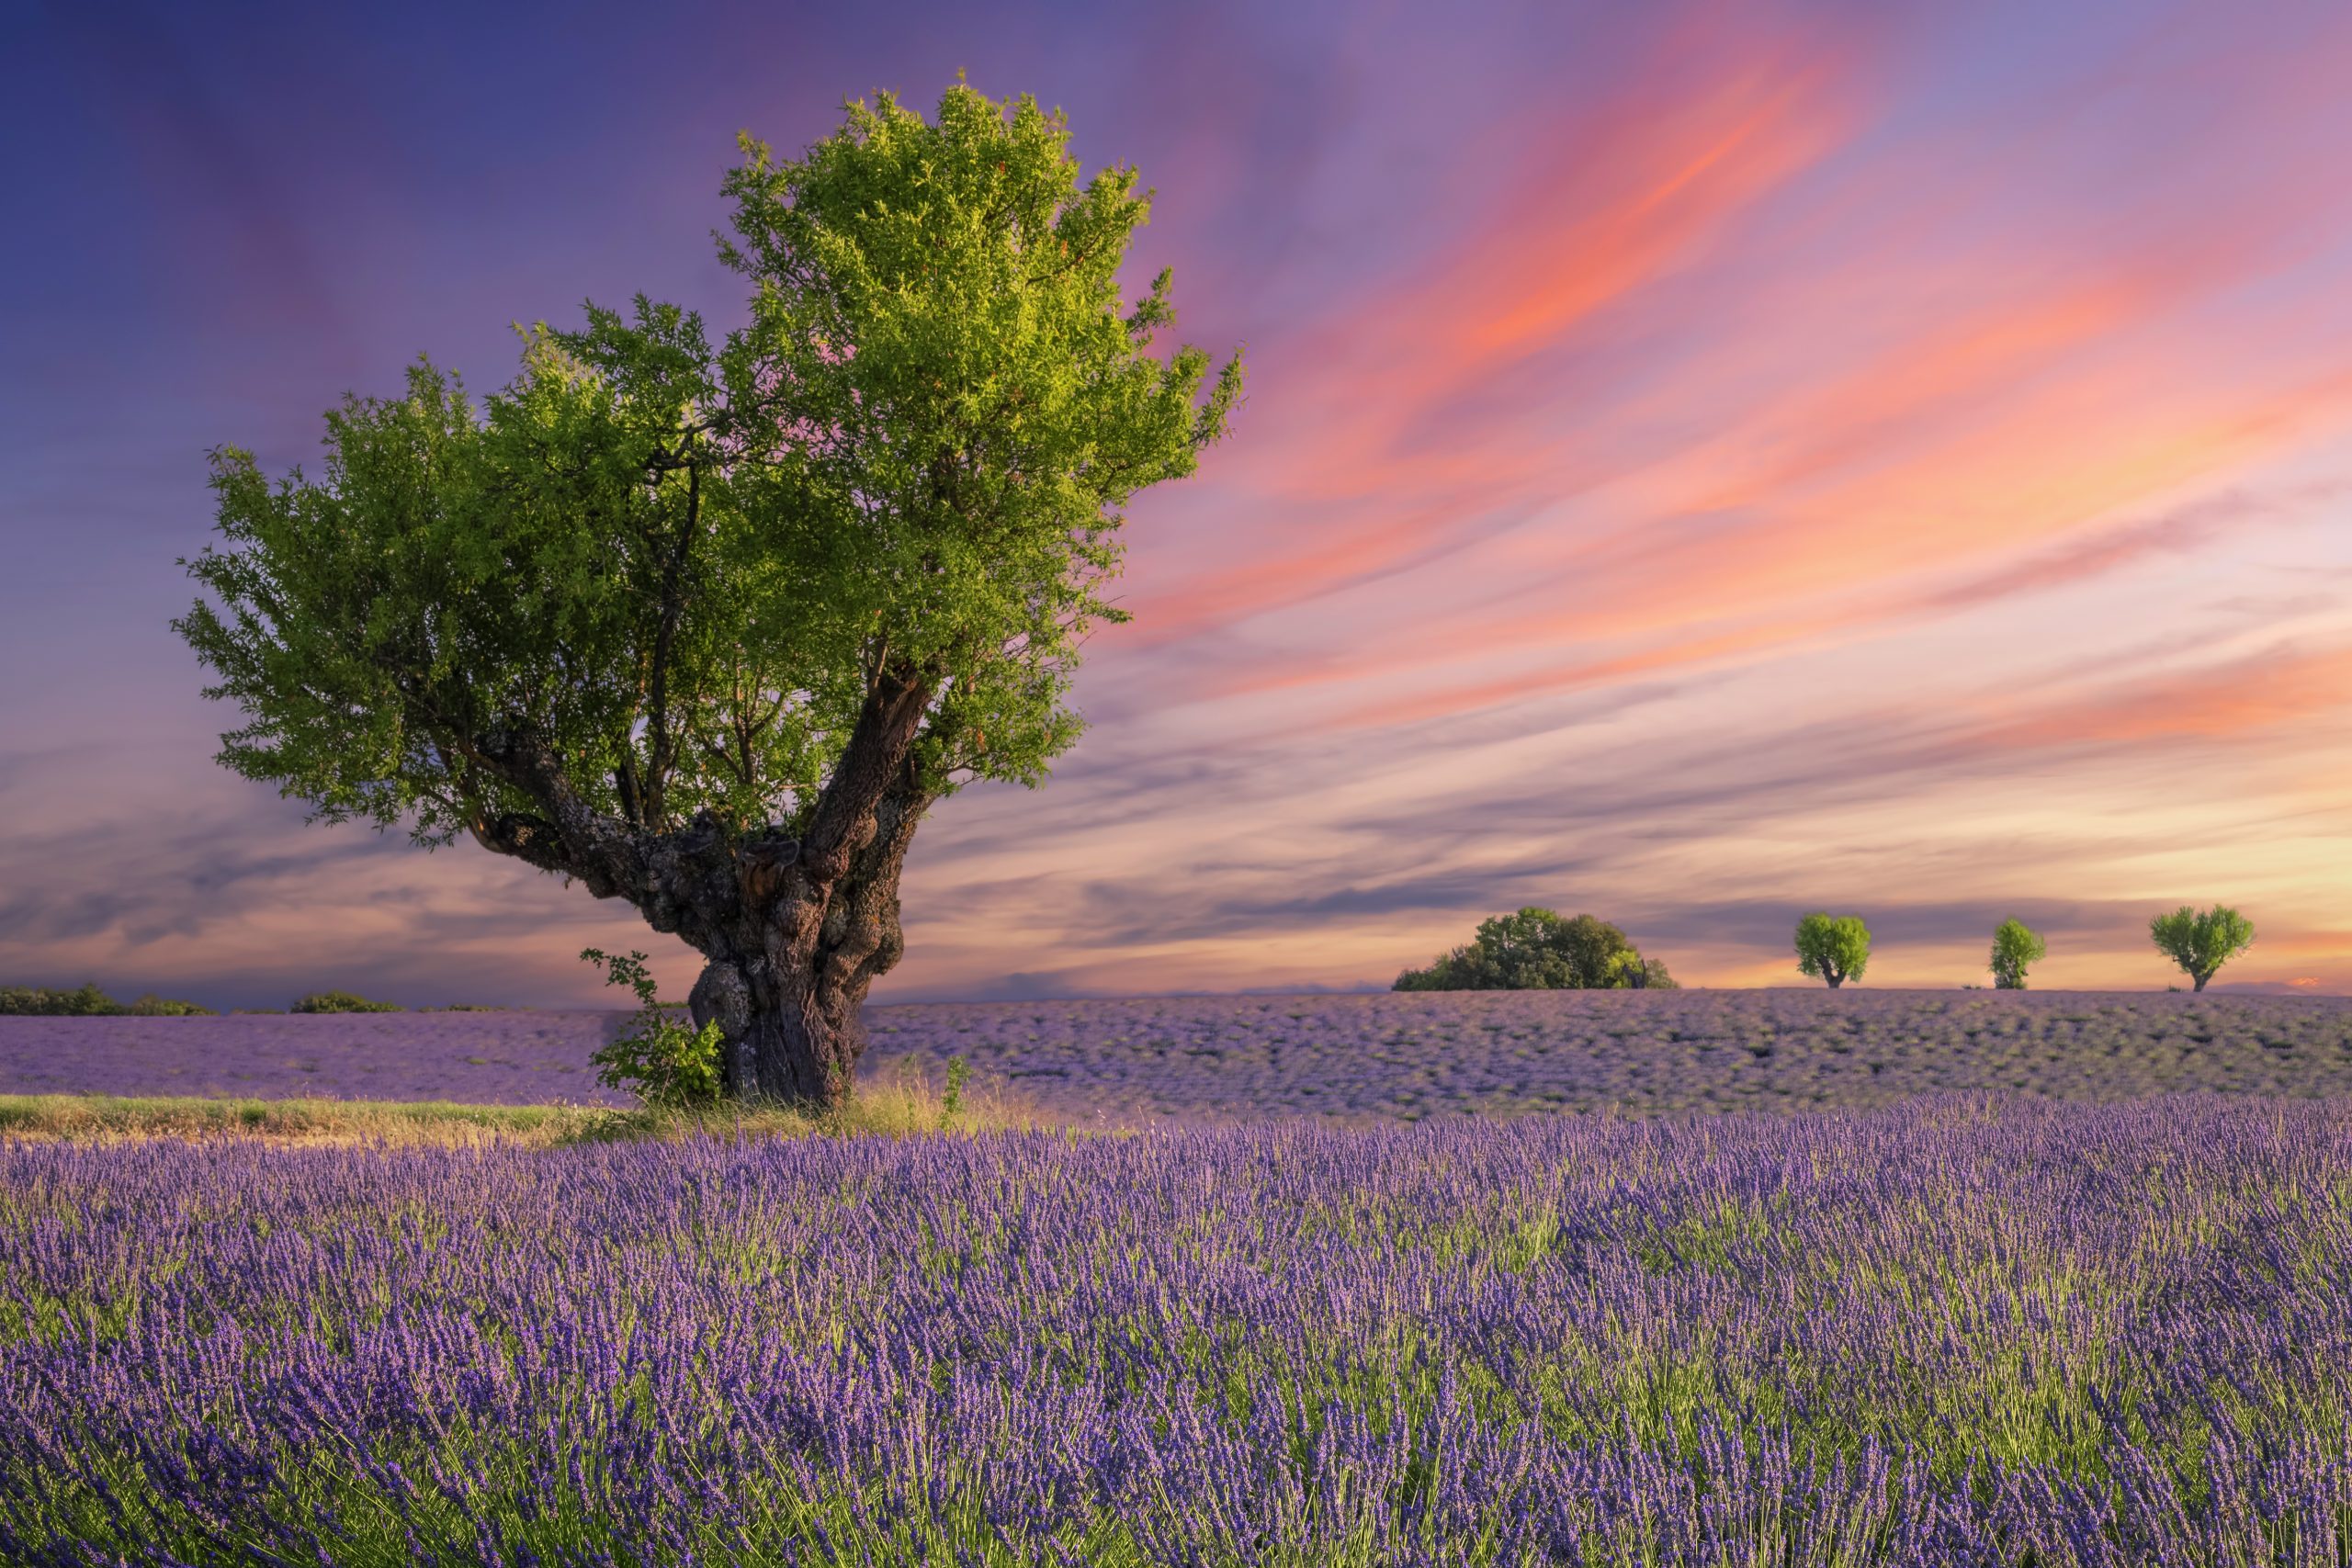 A tree in a field of purple lavender during a sunset